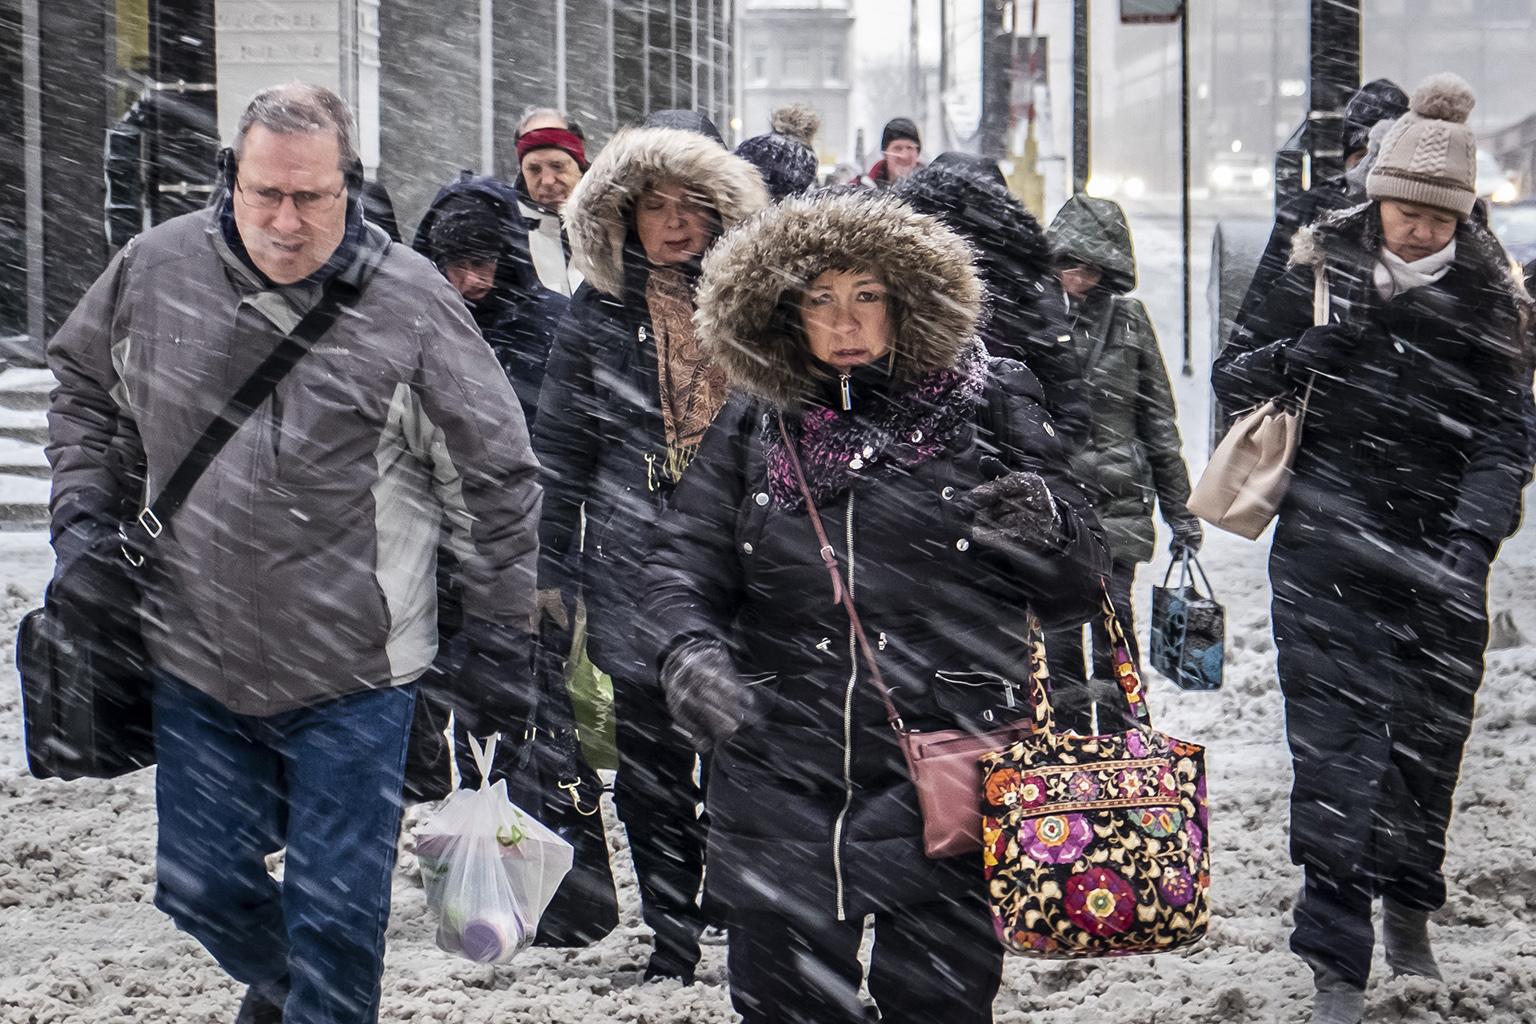 Morning commuters face a tough slog on Wacker Drive in Chicago, Monday, Jan. 28, 2019. (Rich Hein / Chicago Sun-Times via AP)